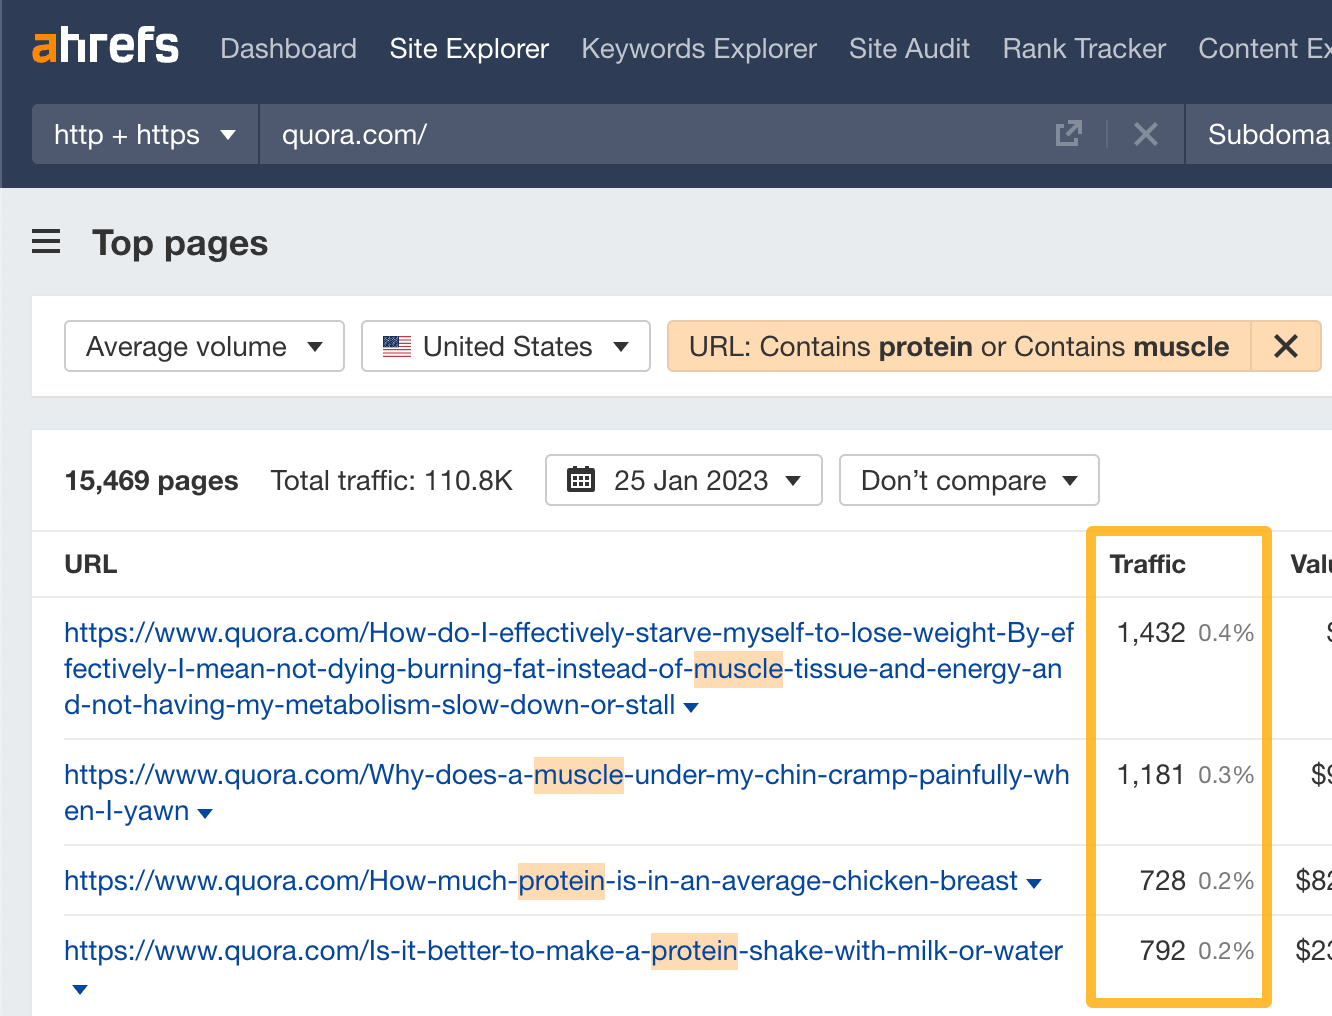 Searching for relevant Quora threads with traffic in Ahrefs' Site Explorer
